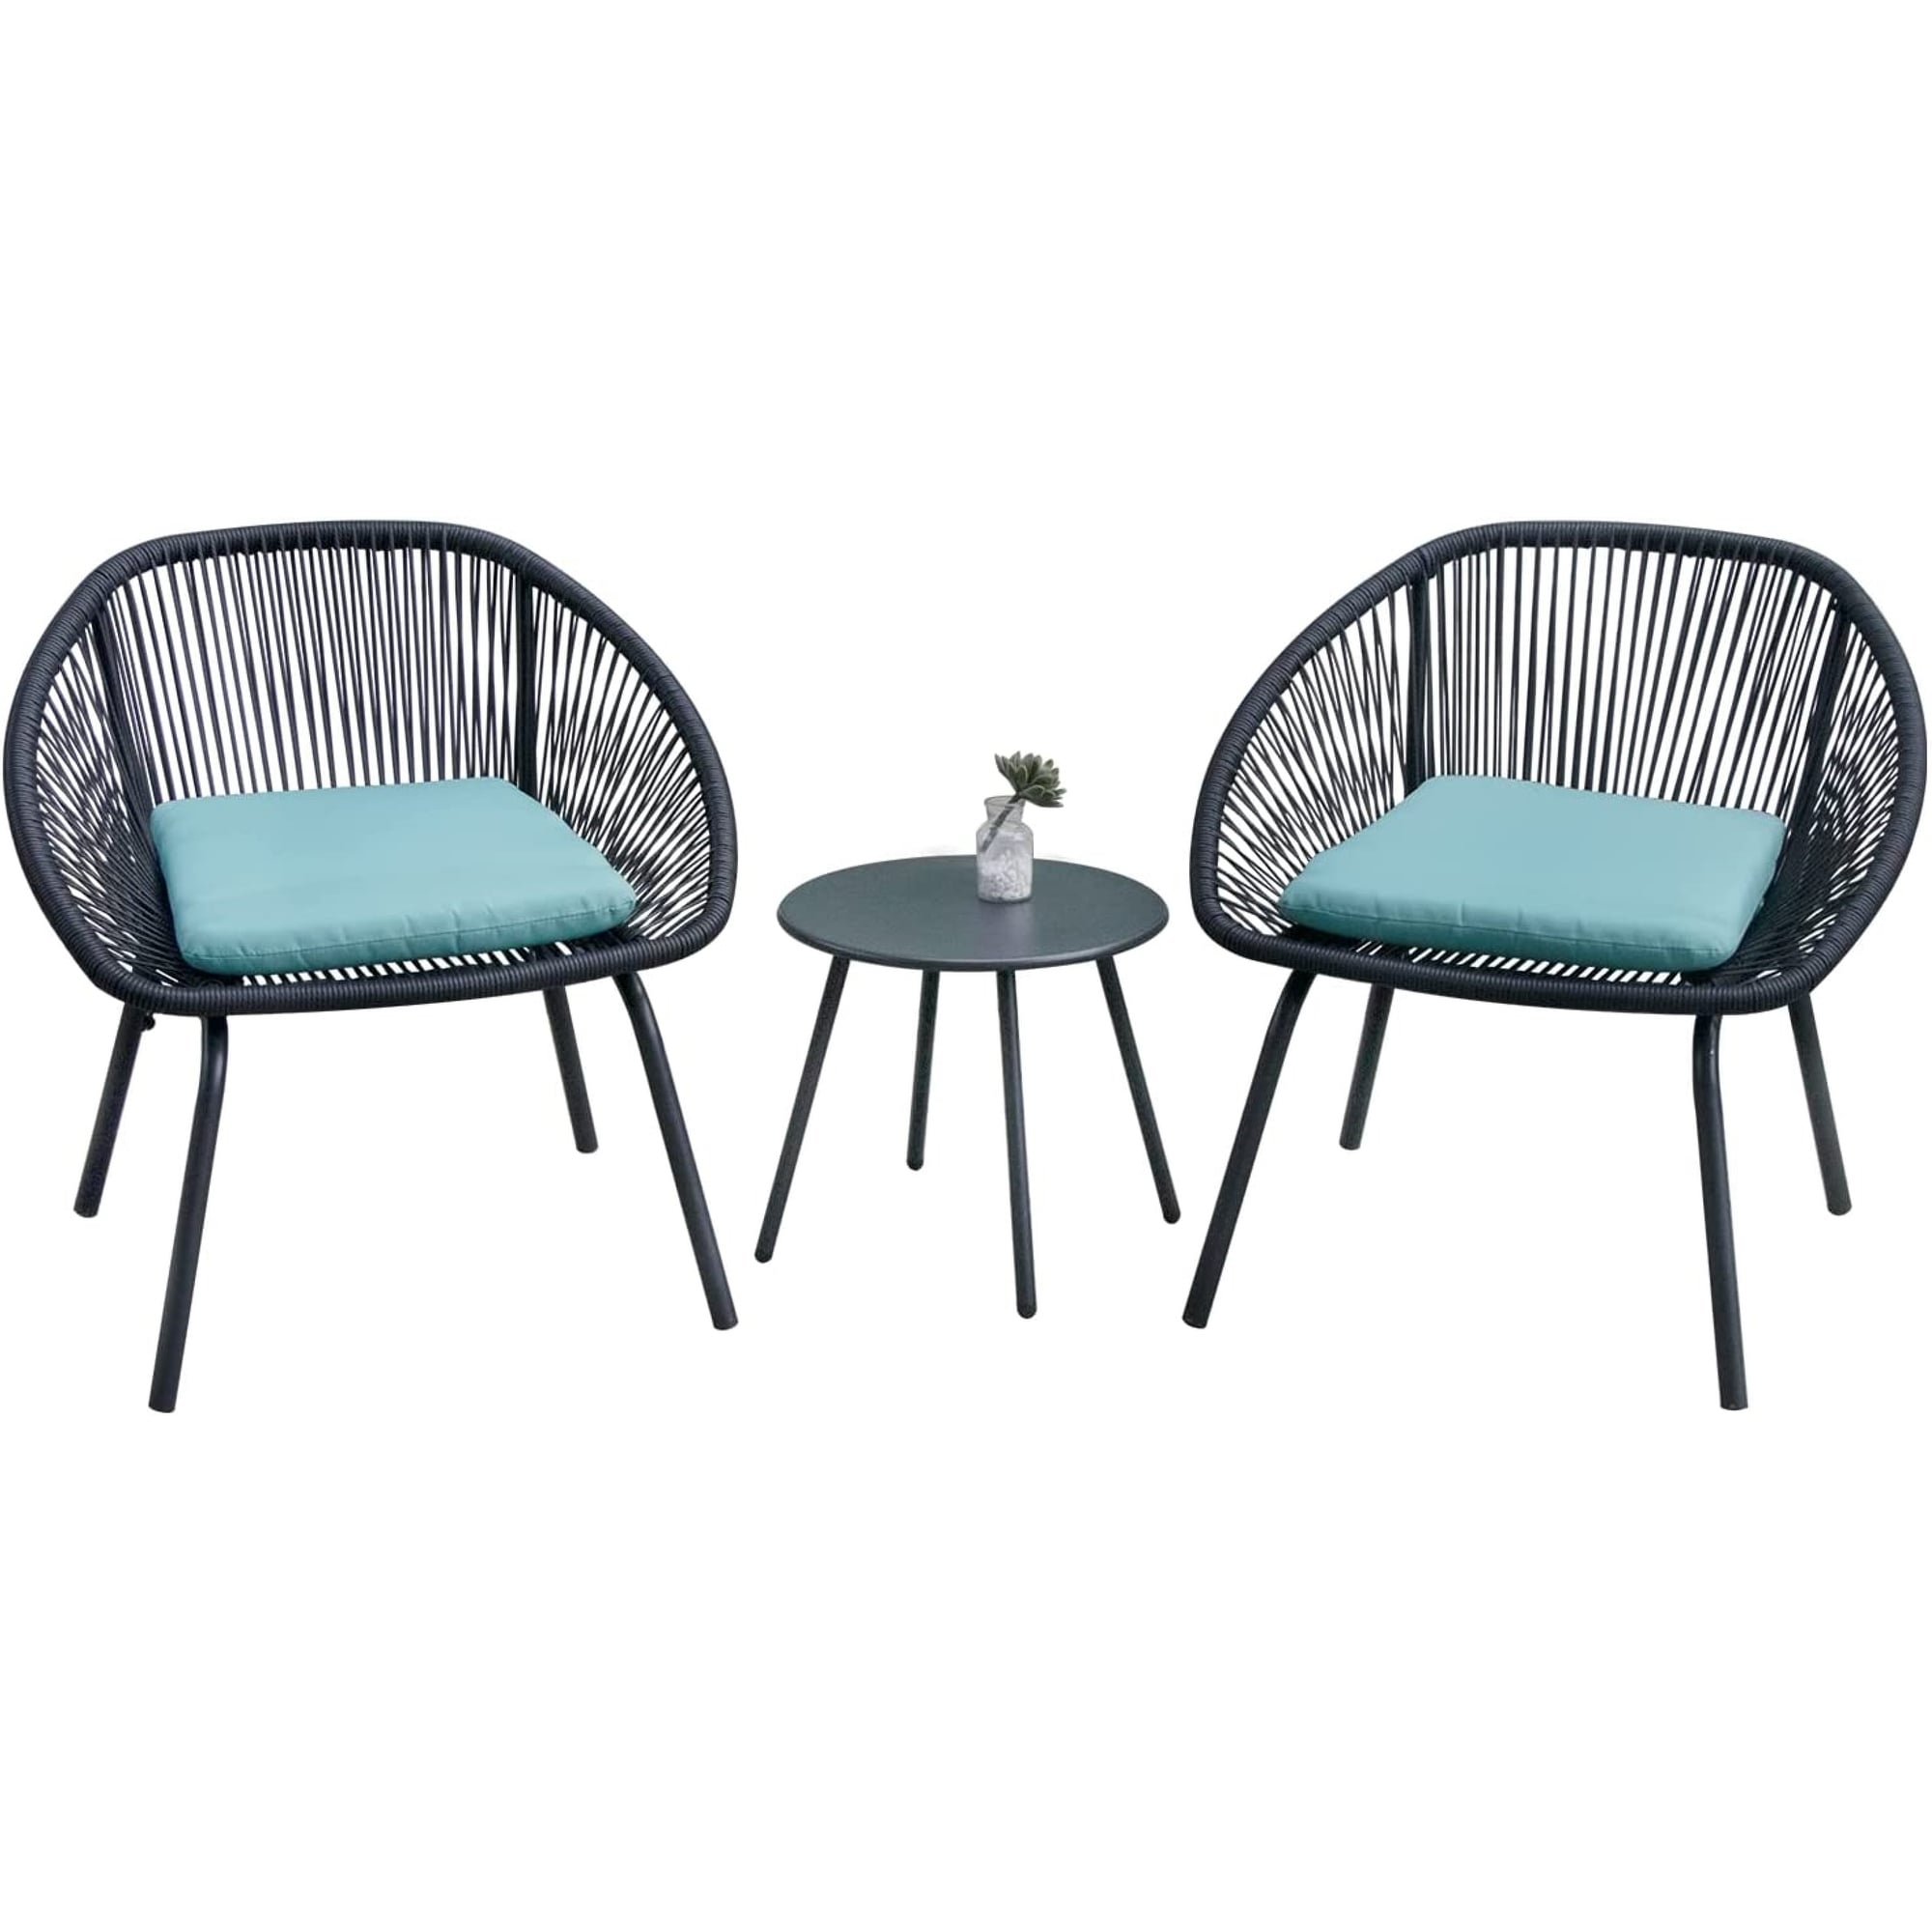 A 3-Piece Set of All-Weather Rattan Chair Furniture for Outdoor terraces and a Wicker Rattan Sofa Set. a Garden Conversation Chair Set with a Round Accent Table a Bistro Table and Chair Set 